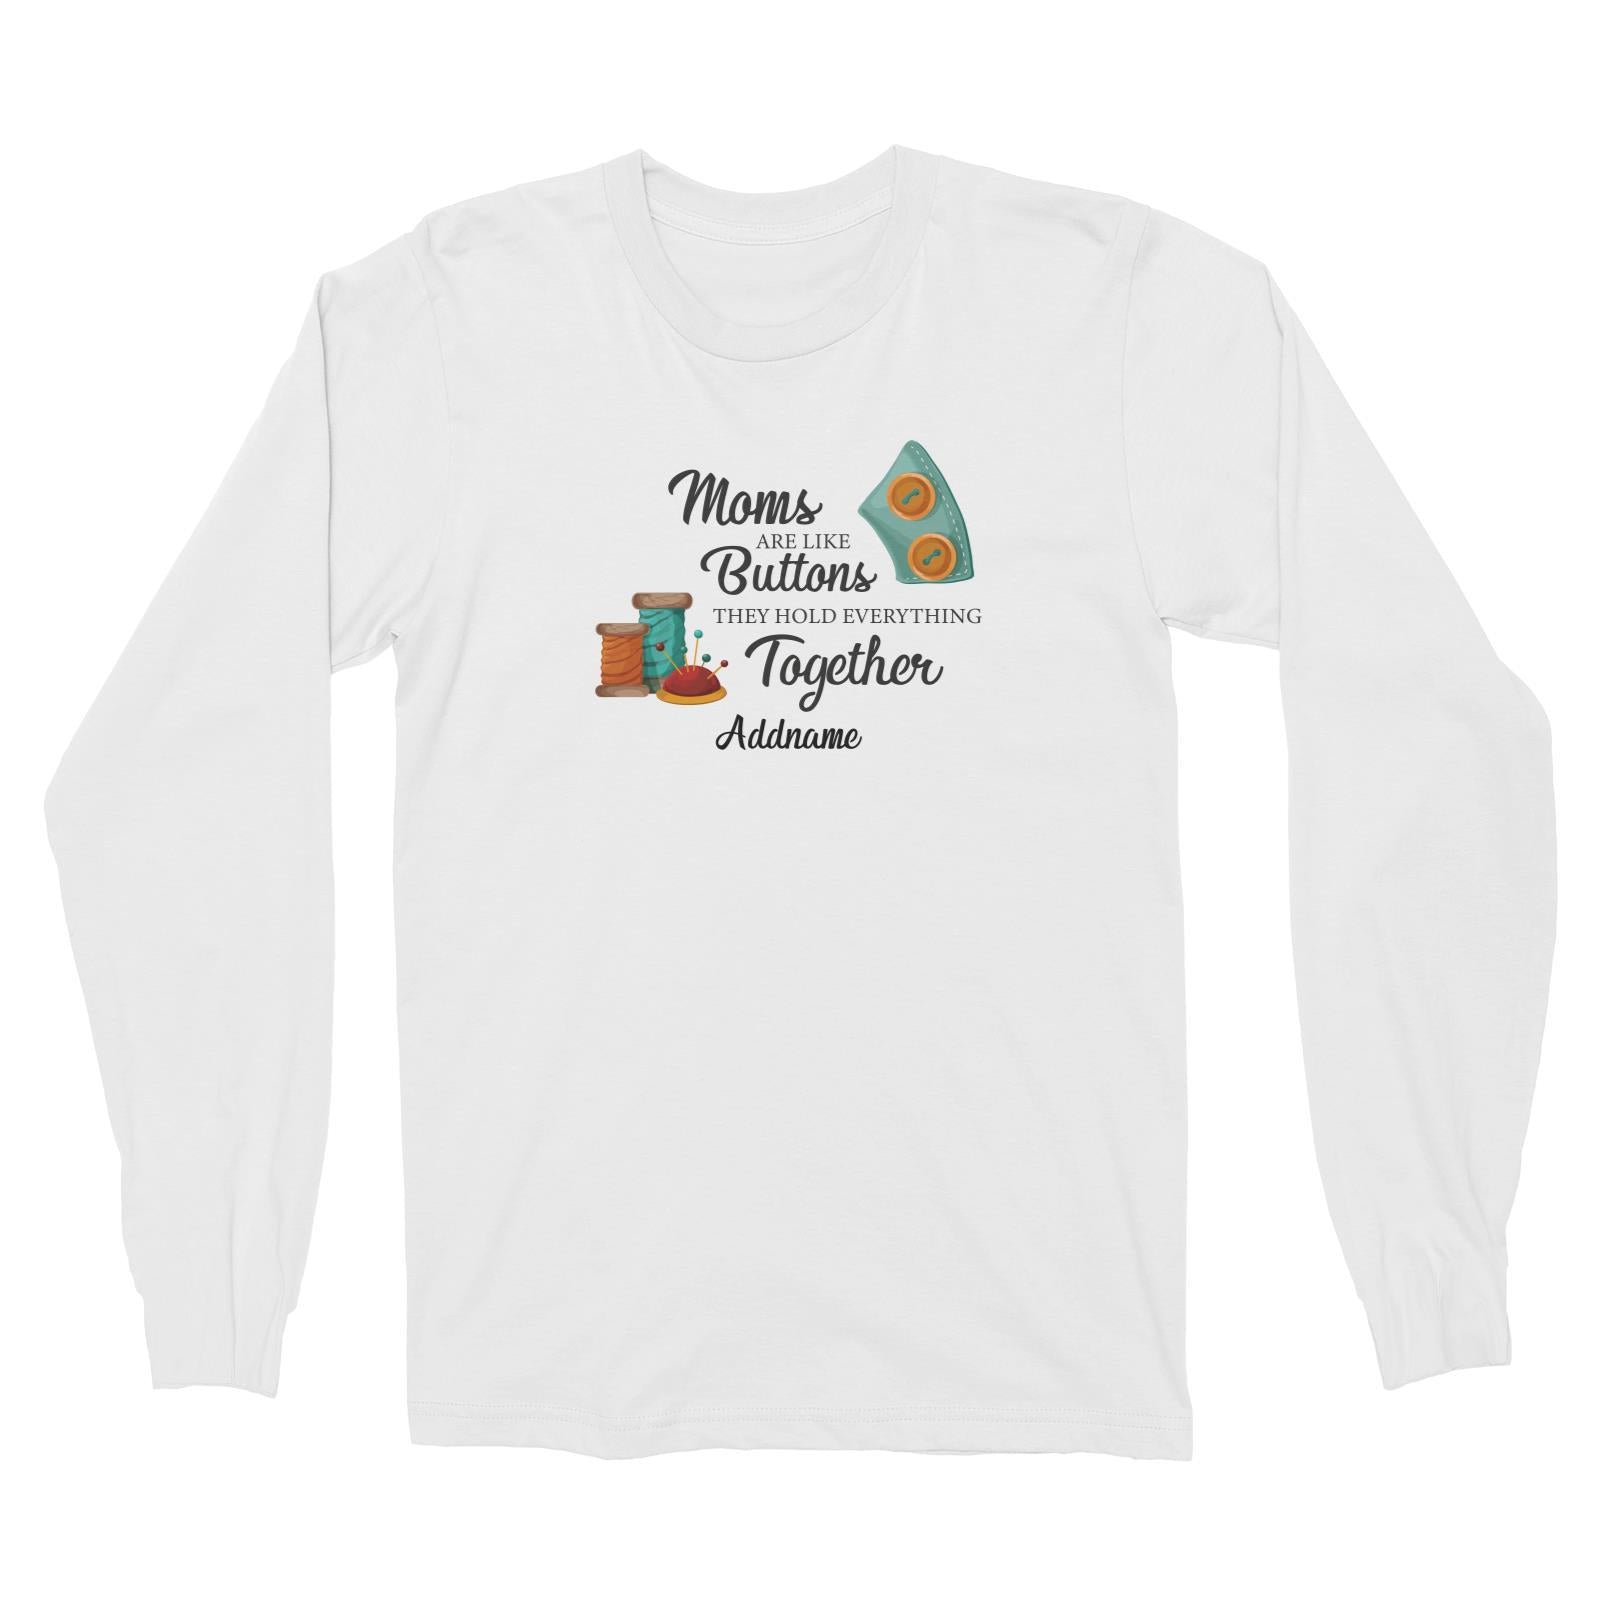 Sweet Mom Quotes 2 Moms Are Like Buttons They Hold Everything Together Addname Long Sleeve Unisex T-Shirt